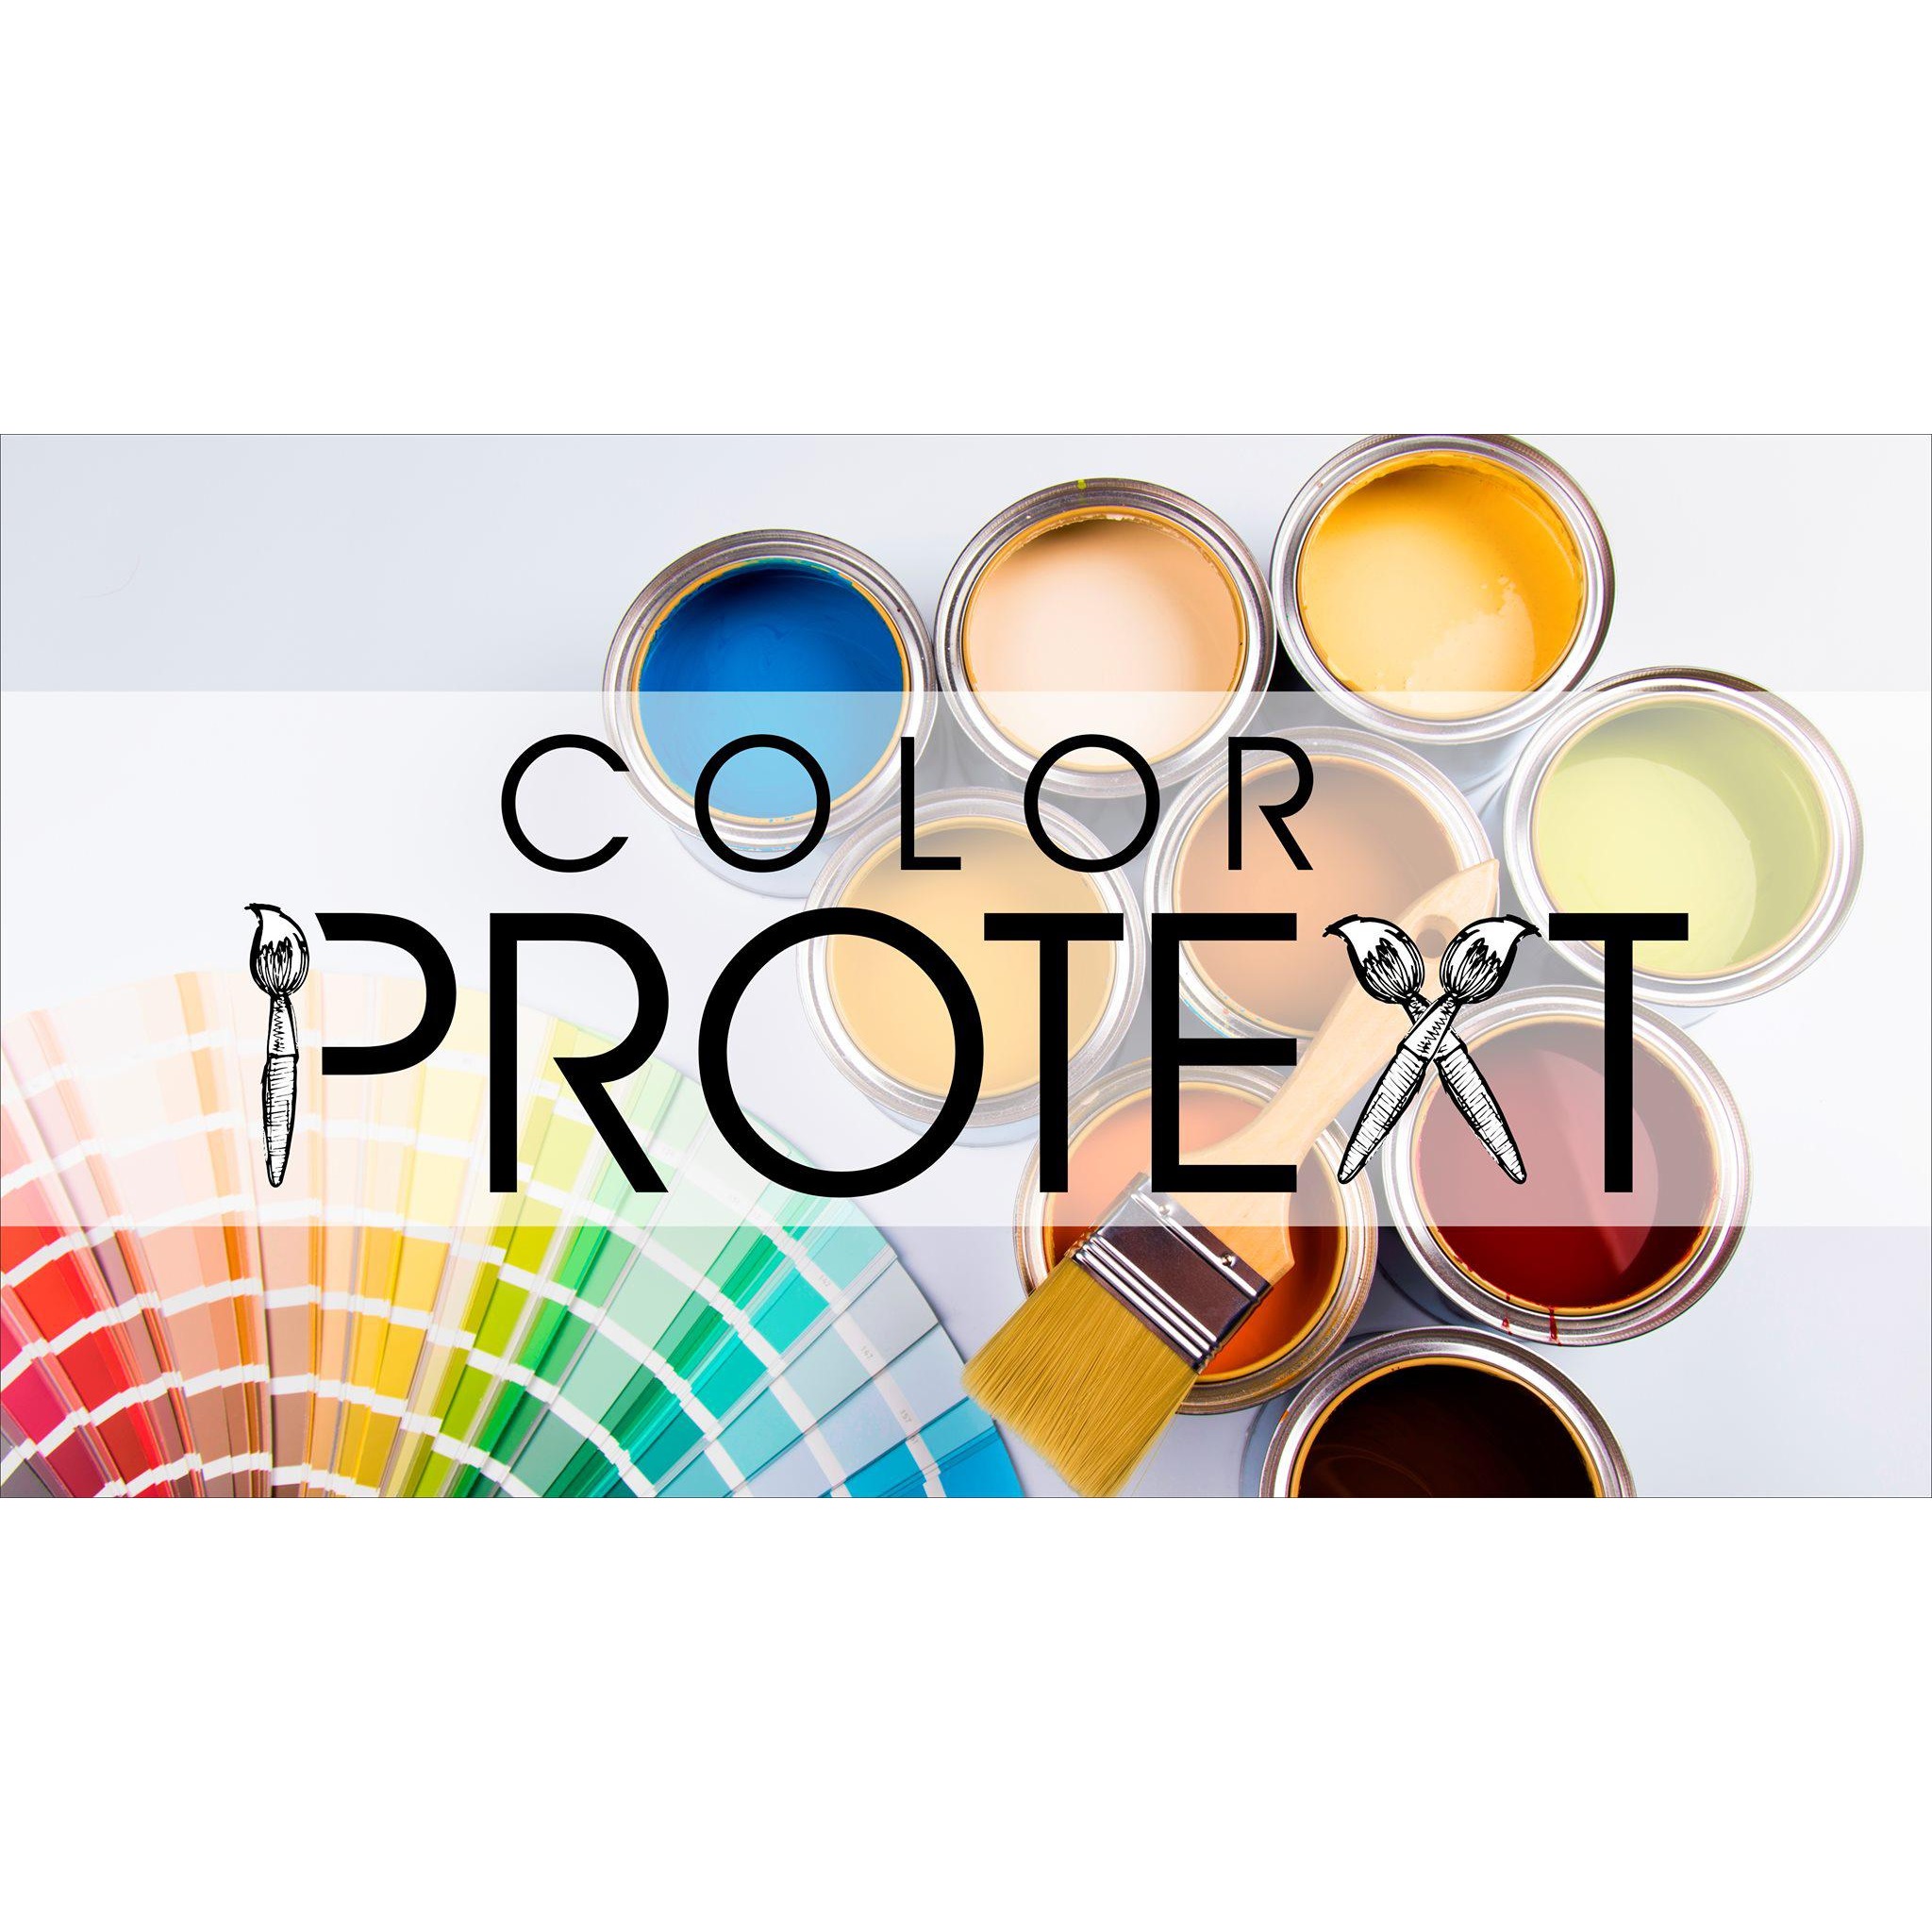 Color PROTEXT